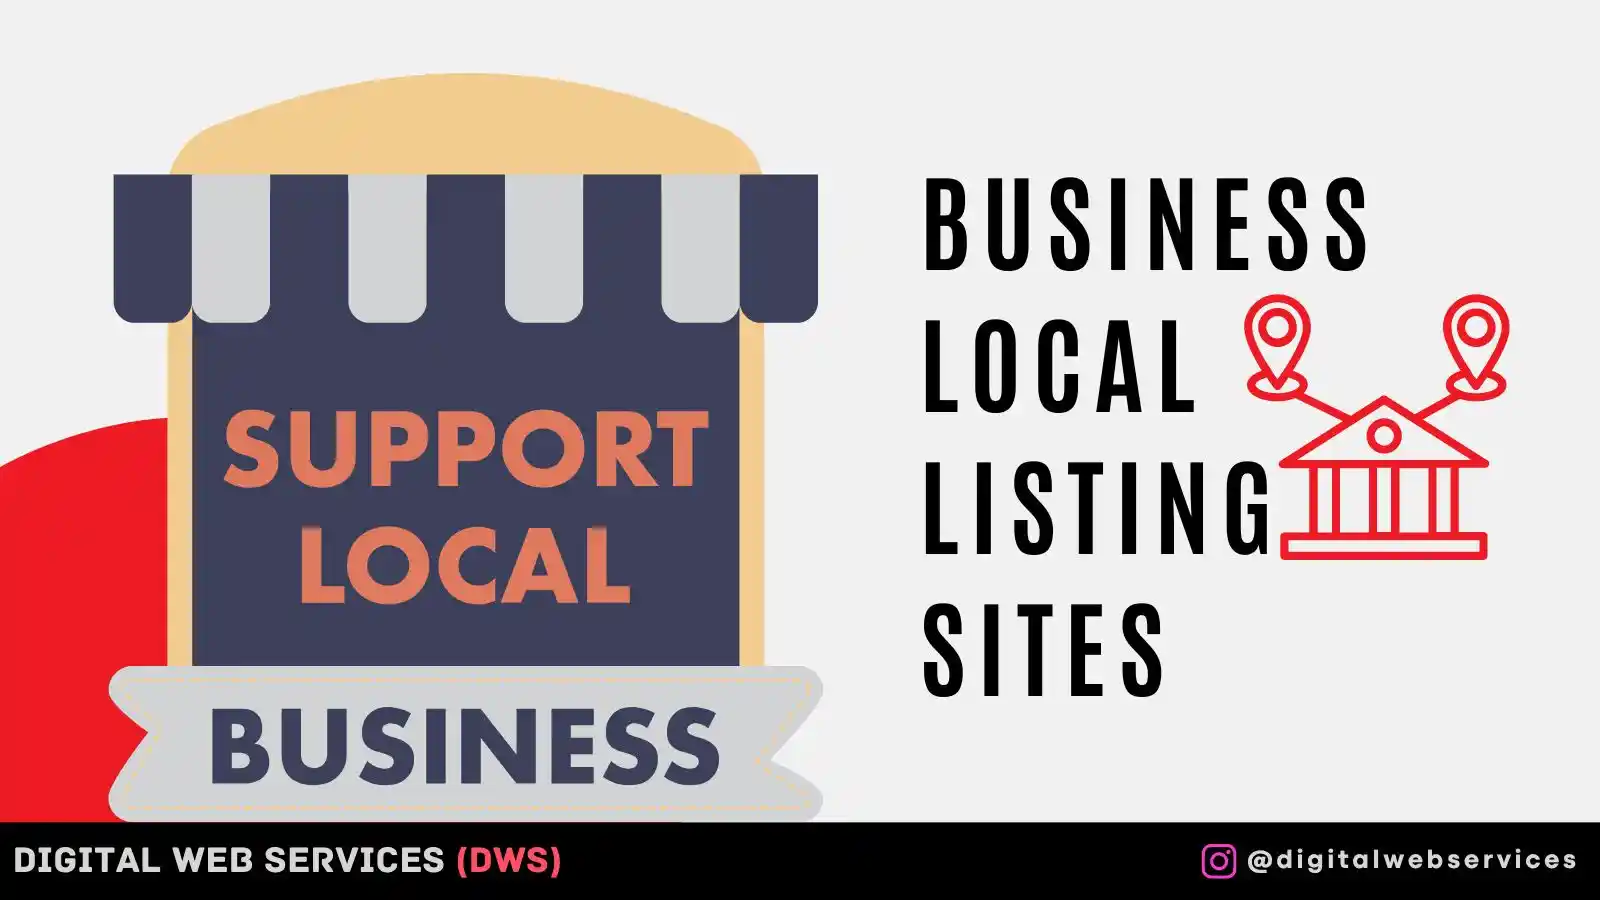 Business Local Listing Sites